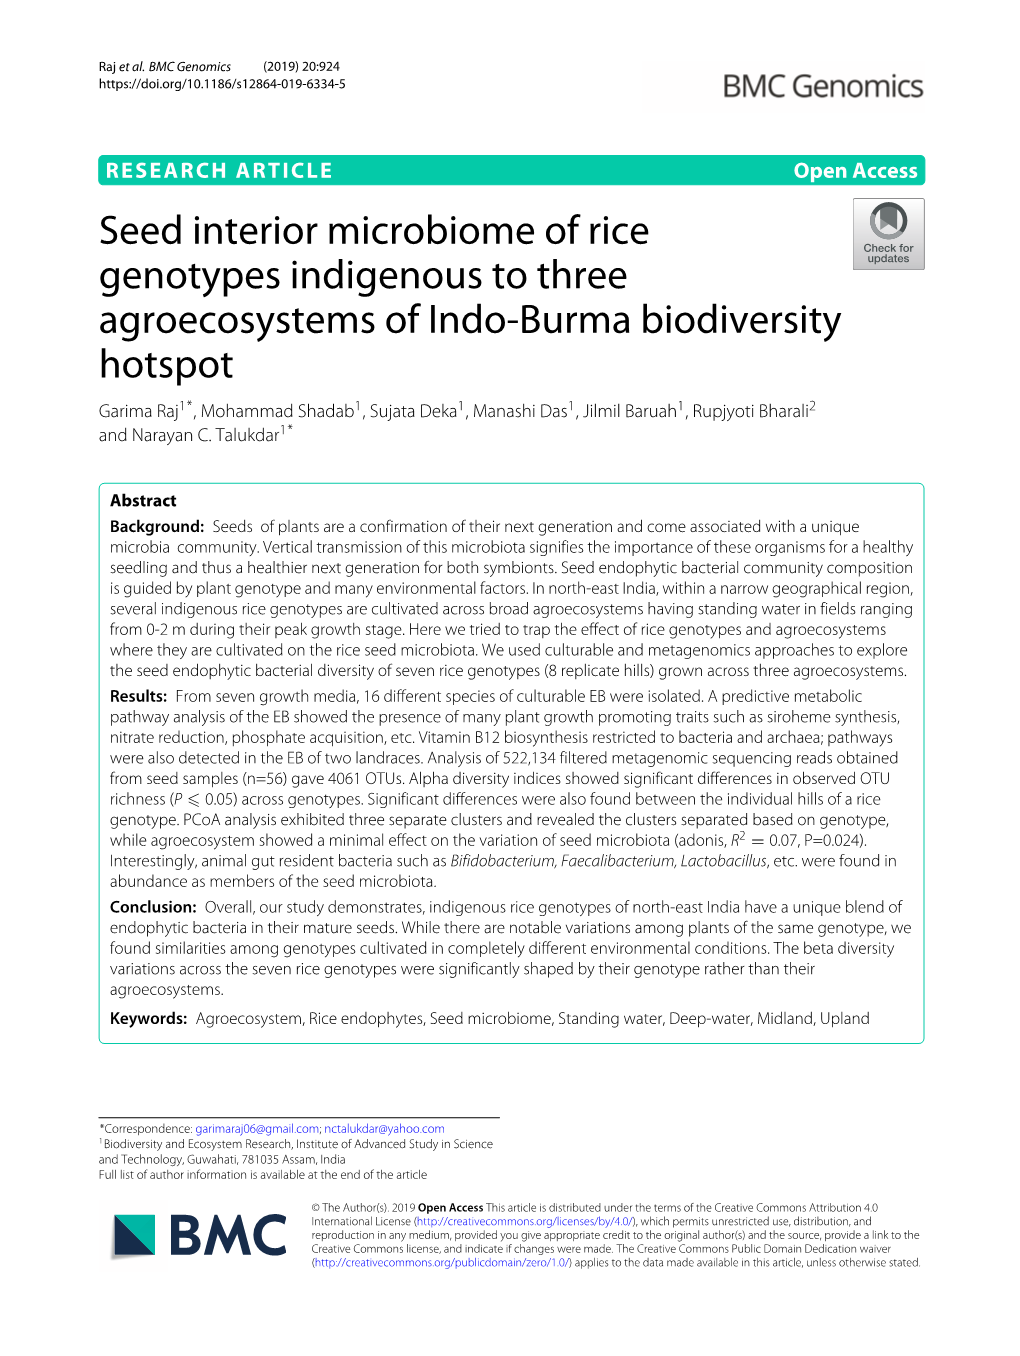 Seed Interior Microbiome of Rice Genotypes Indigenous to Three